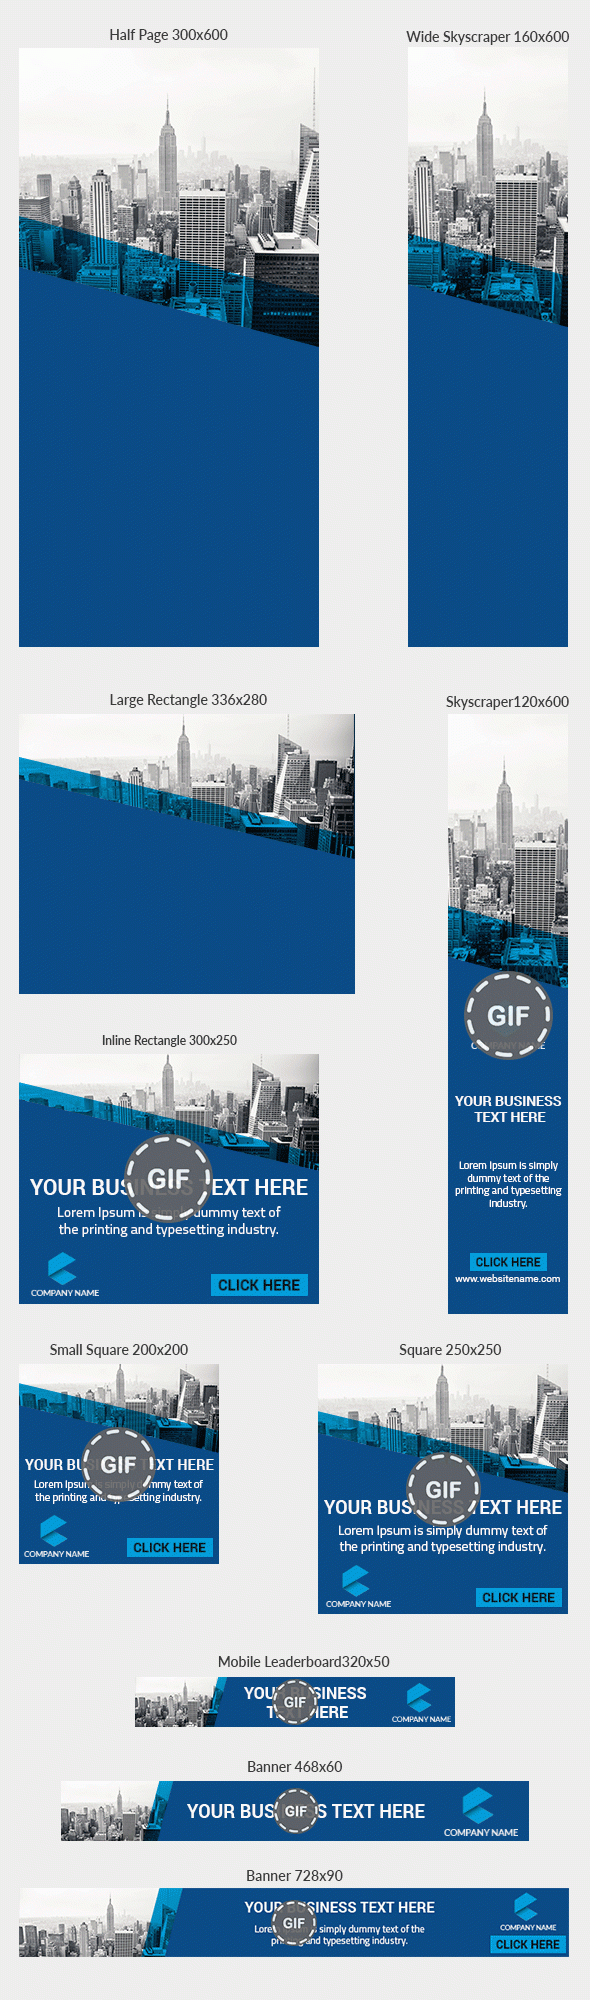 Corporate Animated Banner Template Psd, Gif | Web Banners Intended For Animated Banner Template